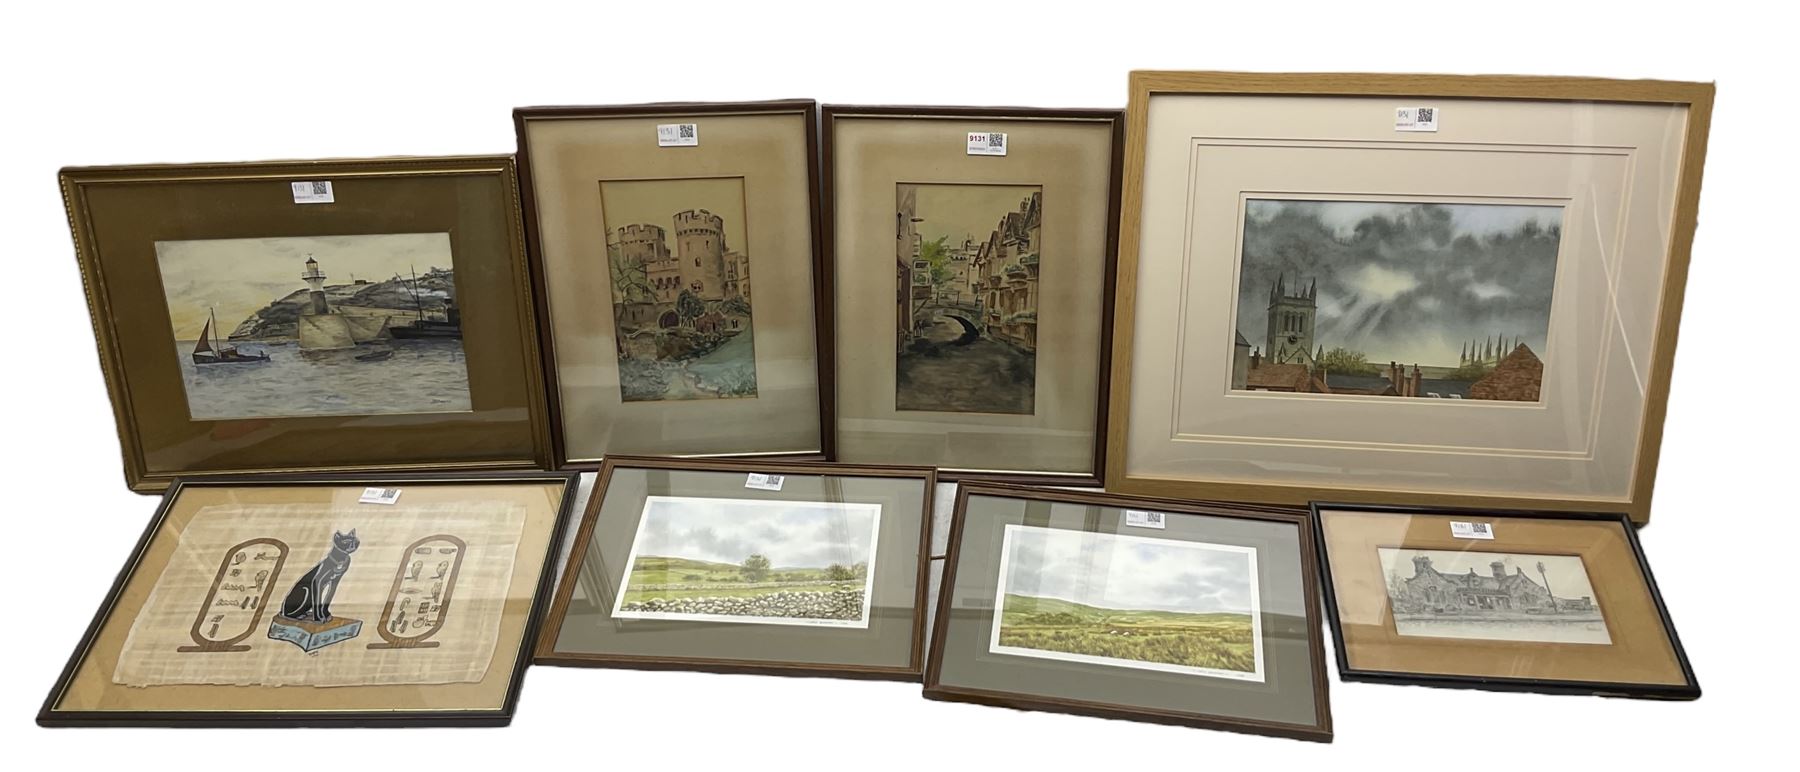 L Darcey (British early 20th century) three watercolours and one pencil sketch; two watercolours by